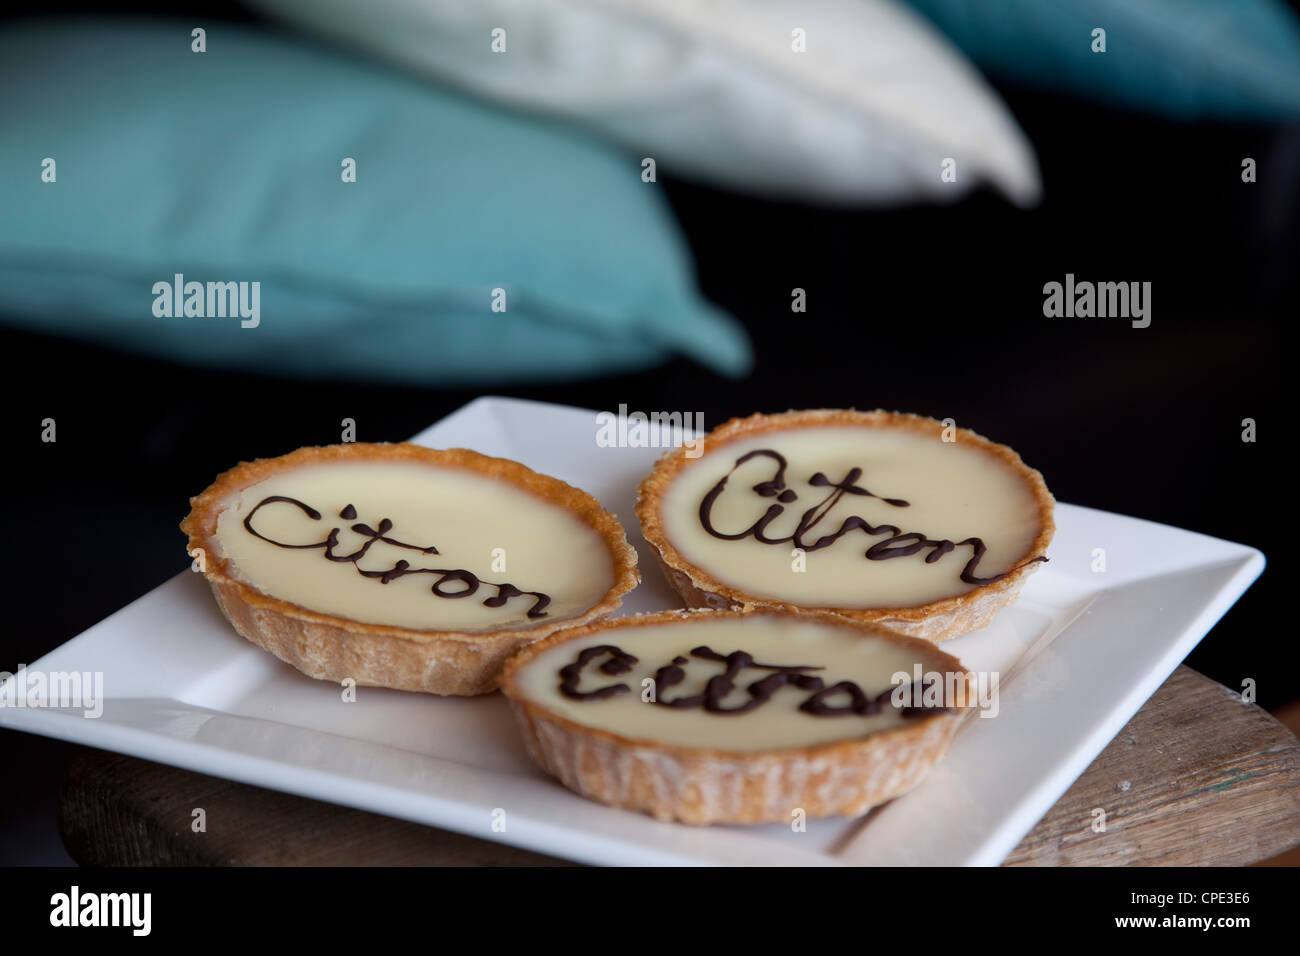 Citron tarts in a French cafe, France, Europe Stock Photo